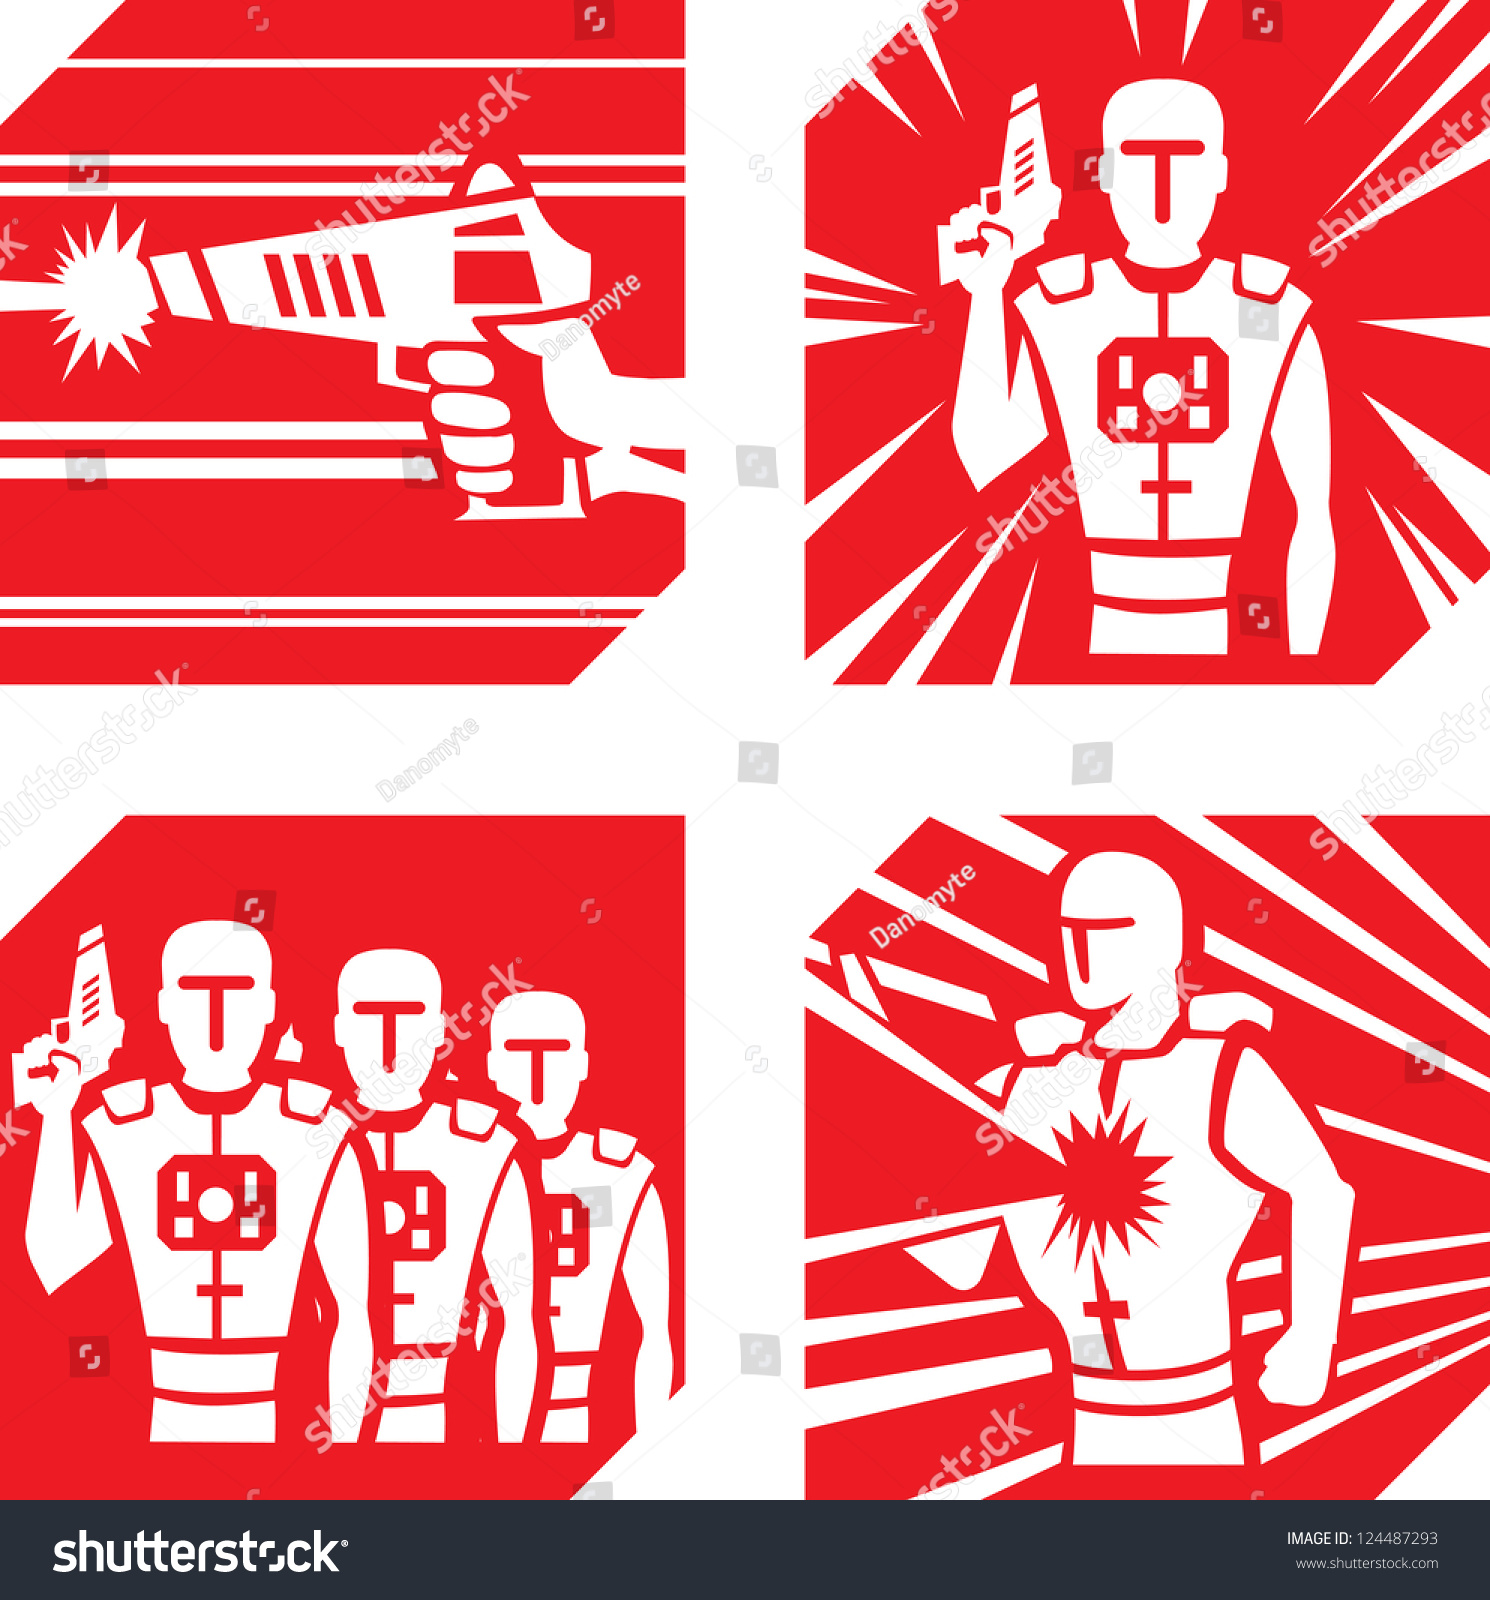 Laser Tag Icons Stock Photo 124487293 : Shutterstock